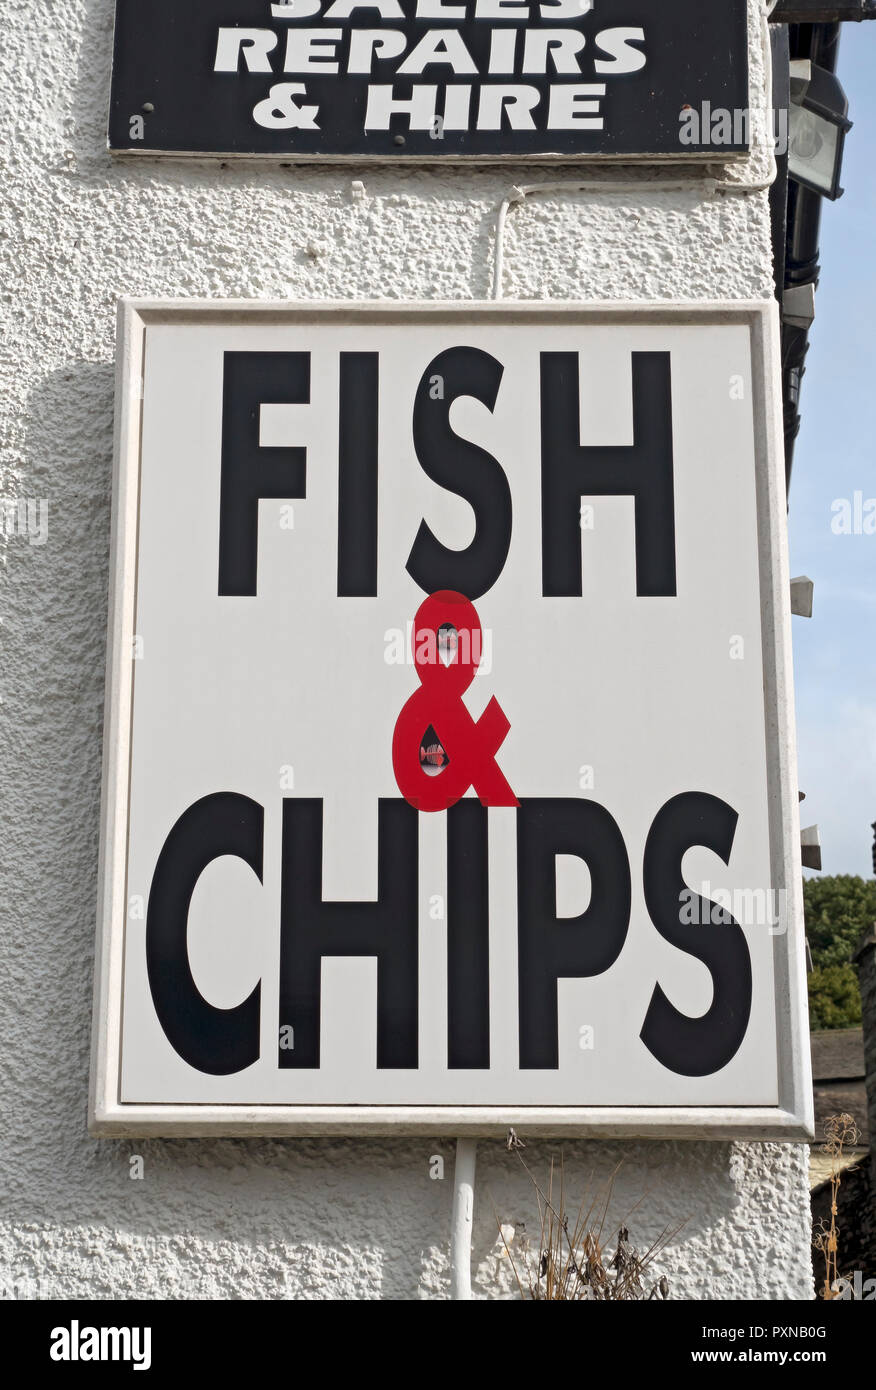 Fish and chip shop & chips sign close up England UK United Kingdom GB Great Britain Stock Photo